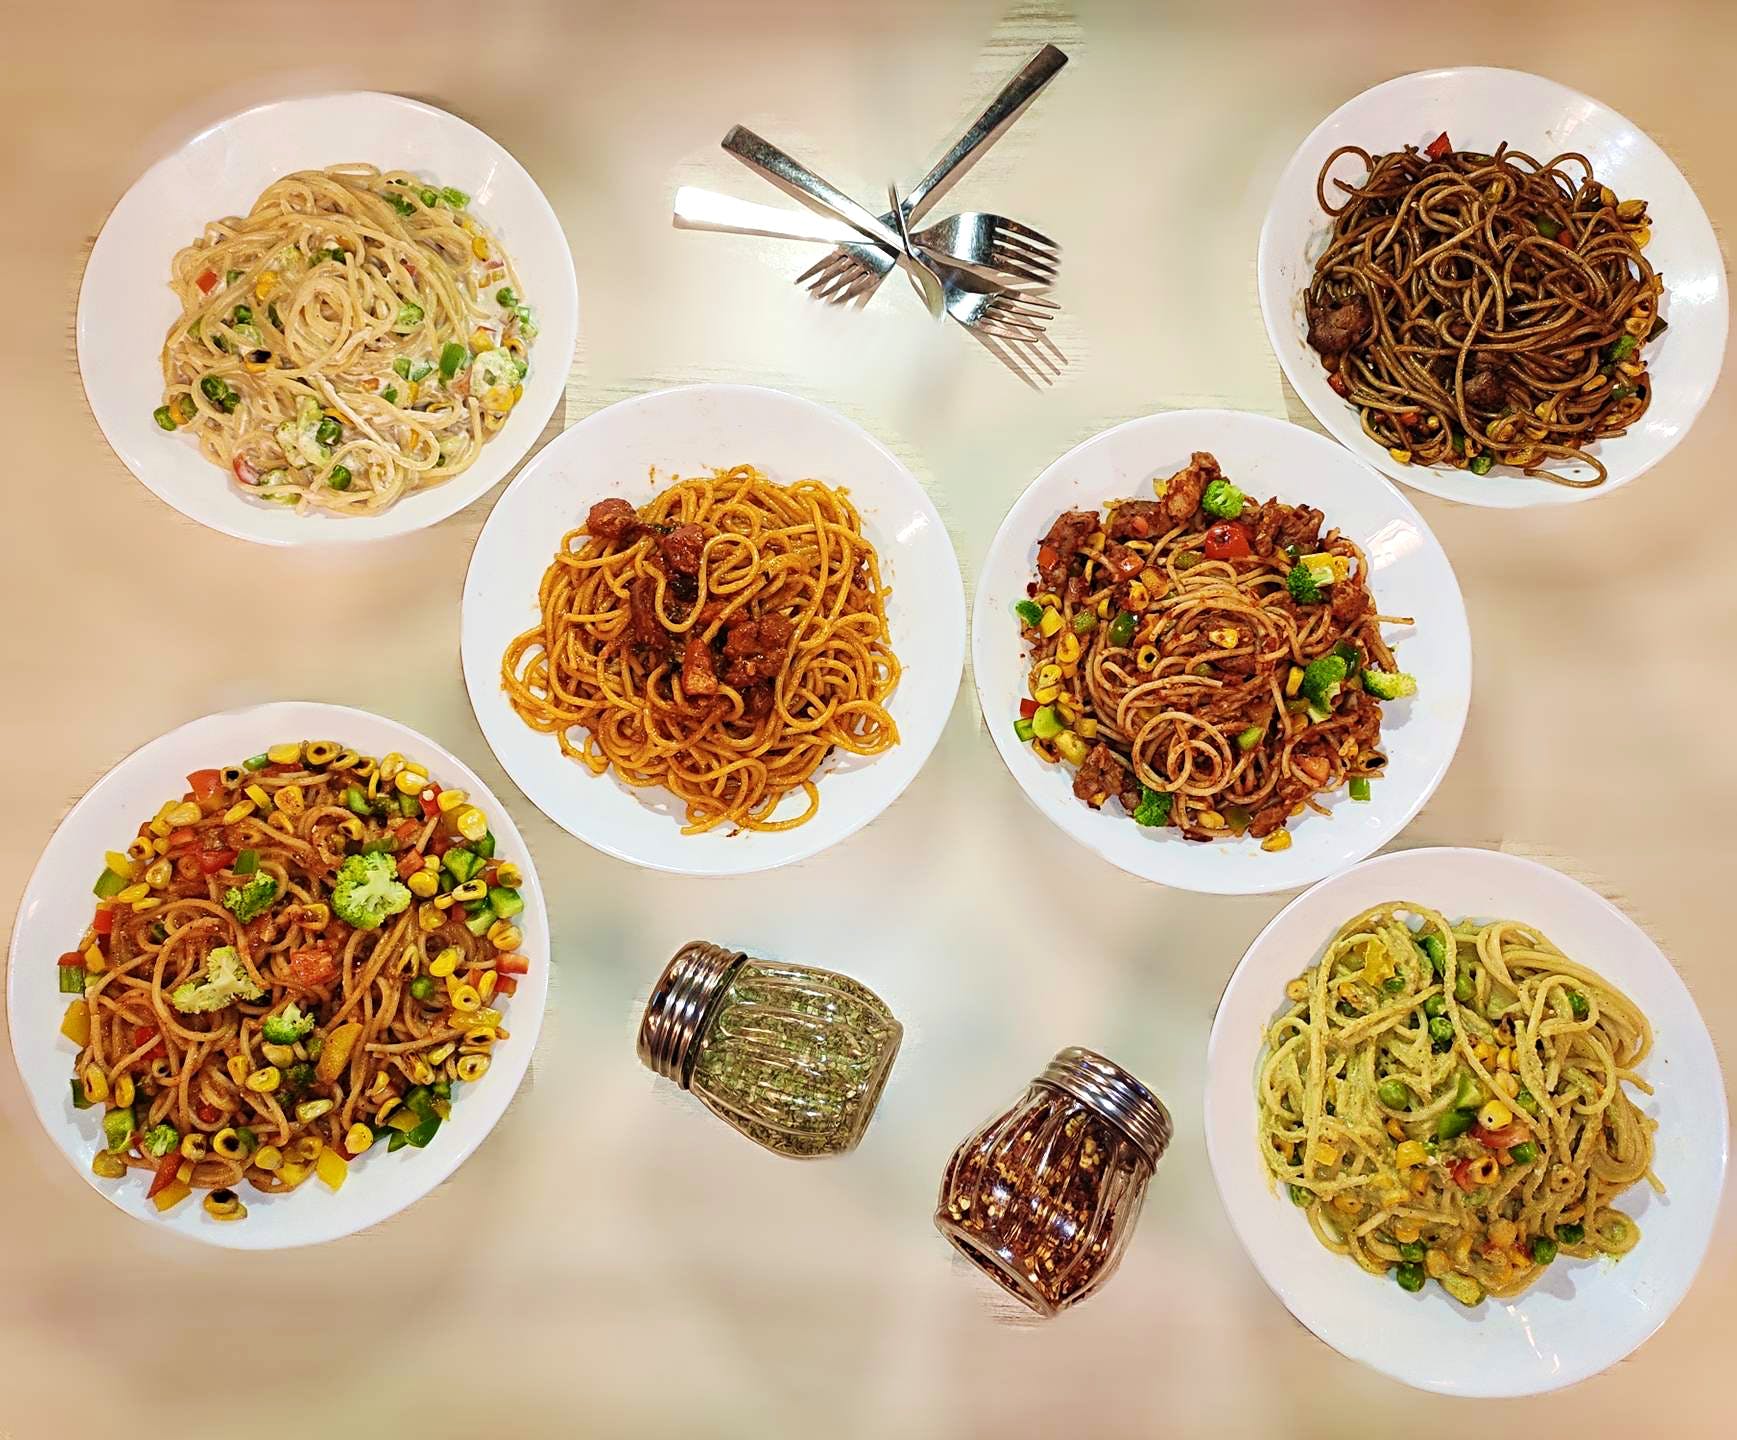 Cuisine,Food,Dish,Ingredient,Noodle,Ants climbing a tree,Produce,Chinese food,Hot dry noodles,Hokkien mee